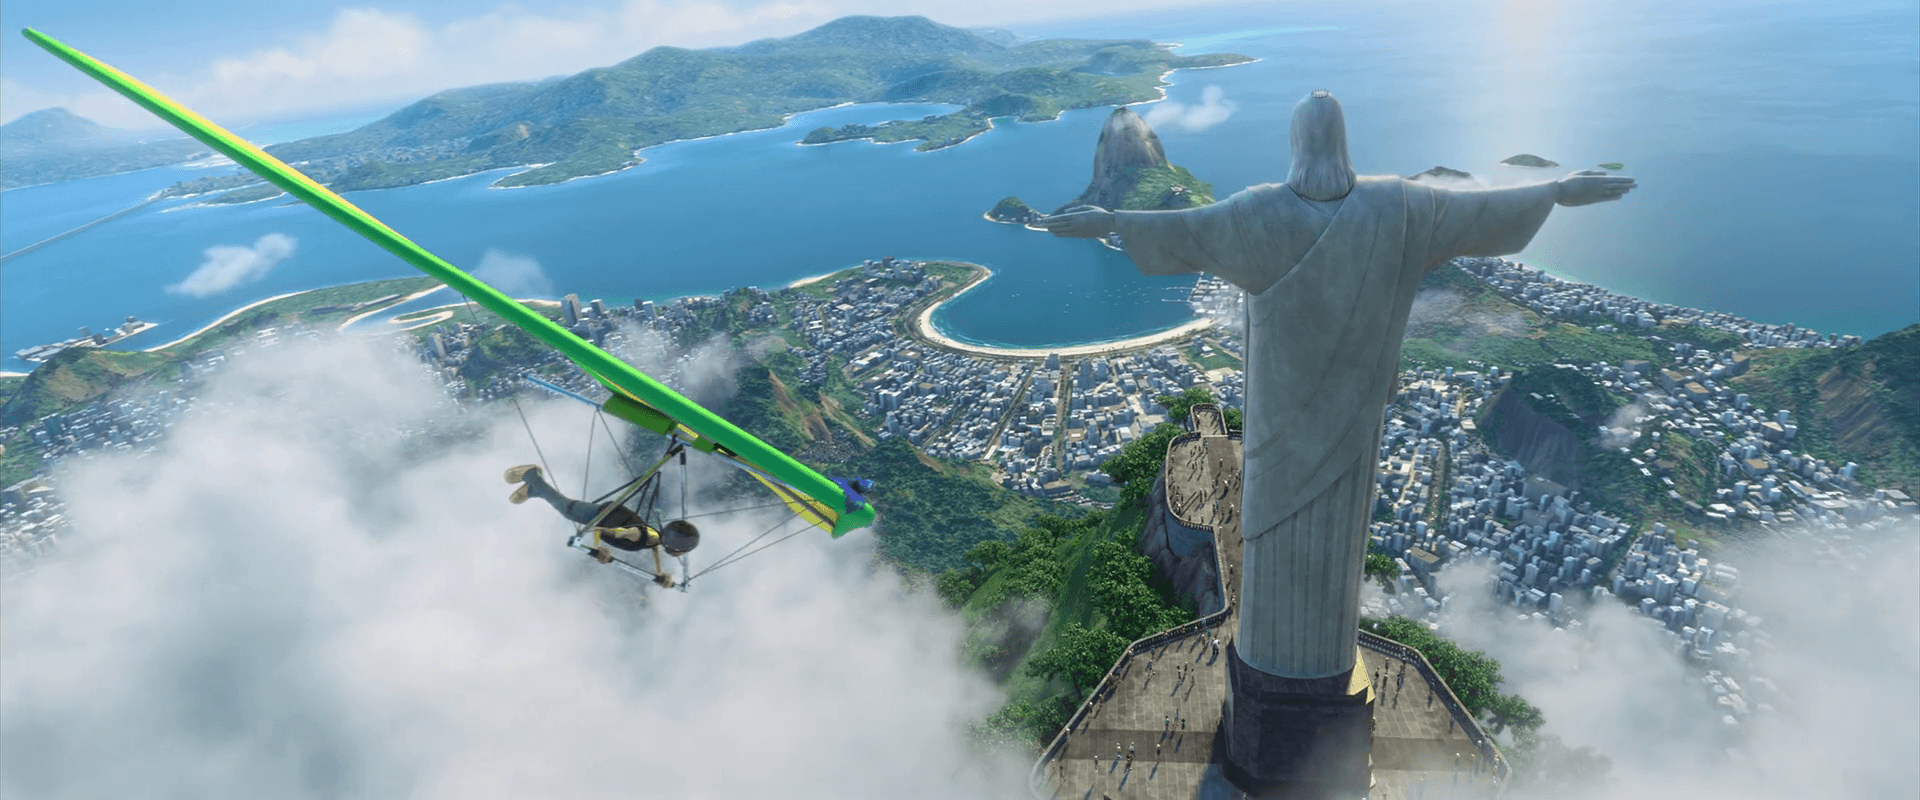 Rio (movie) Wallpaper Christ The Redeemer 2.png